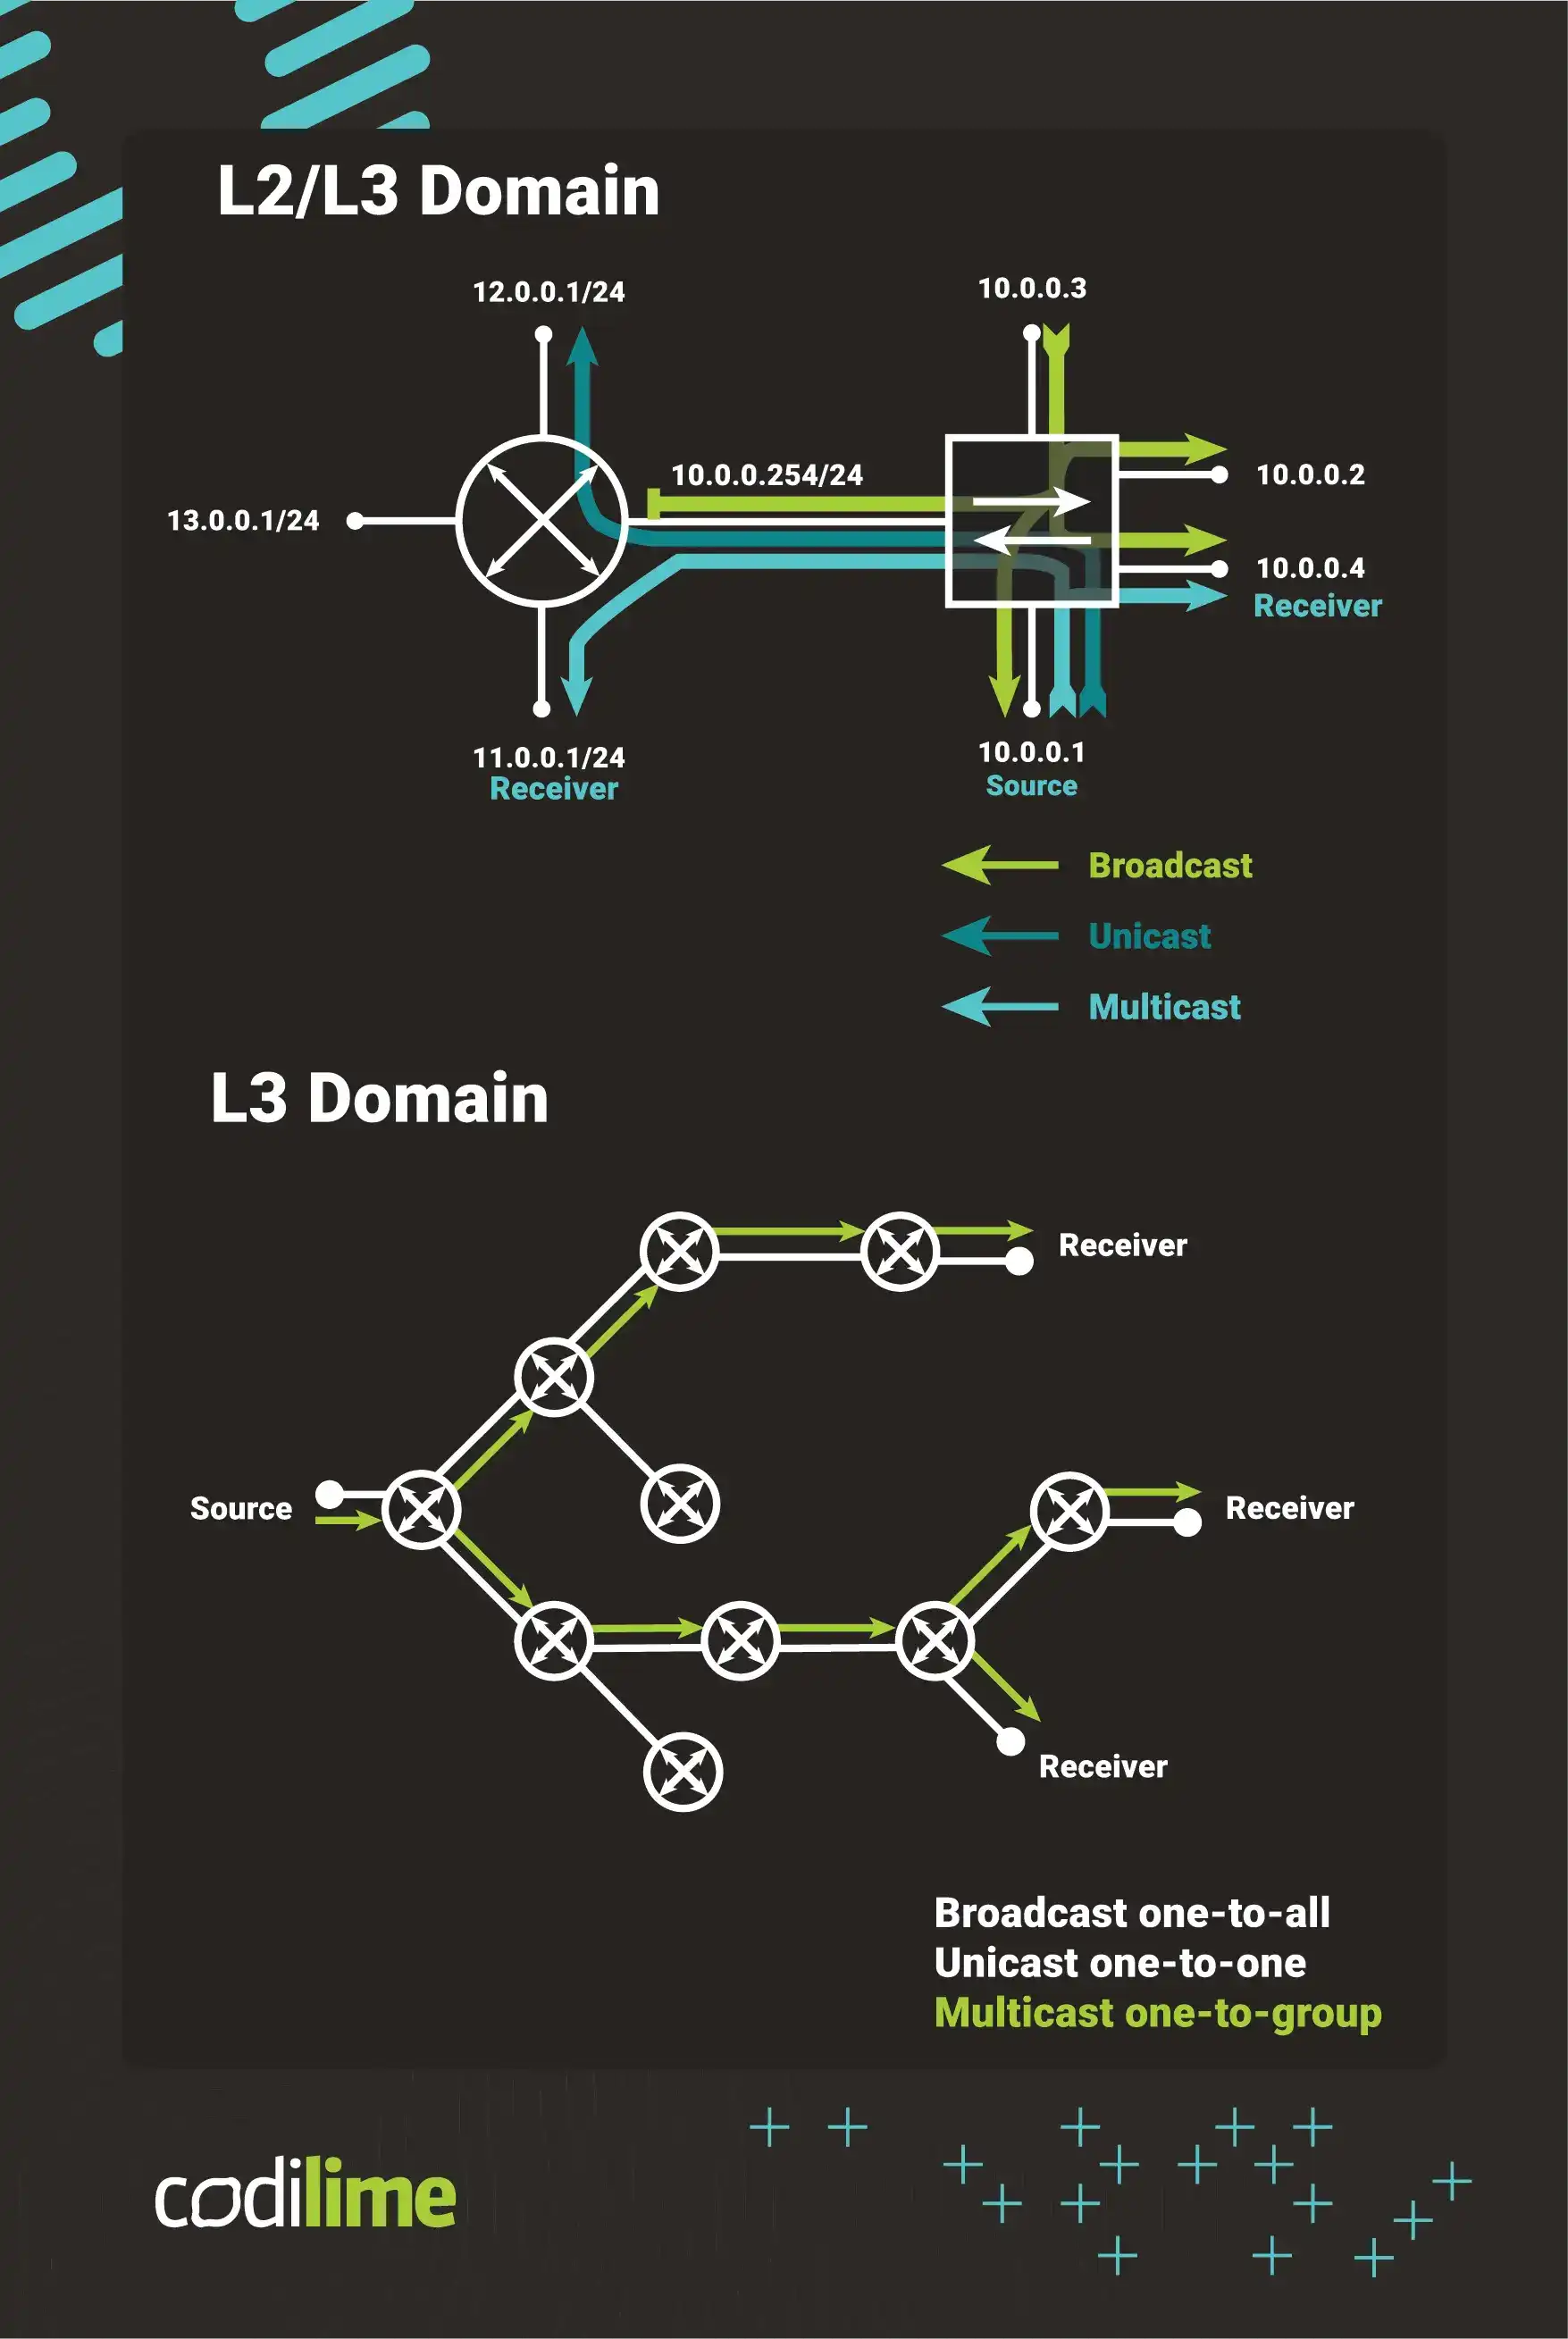 BUM traffic in the L2 and L3 domains